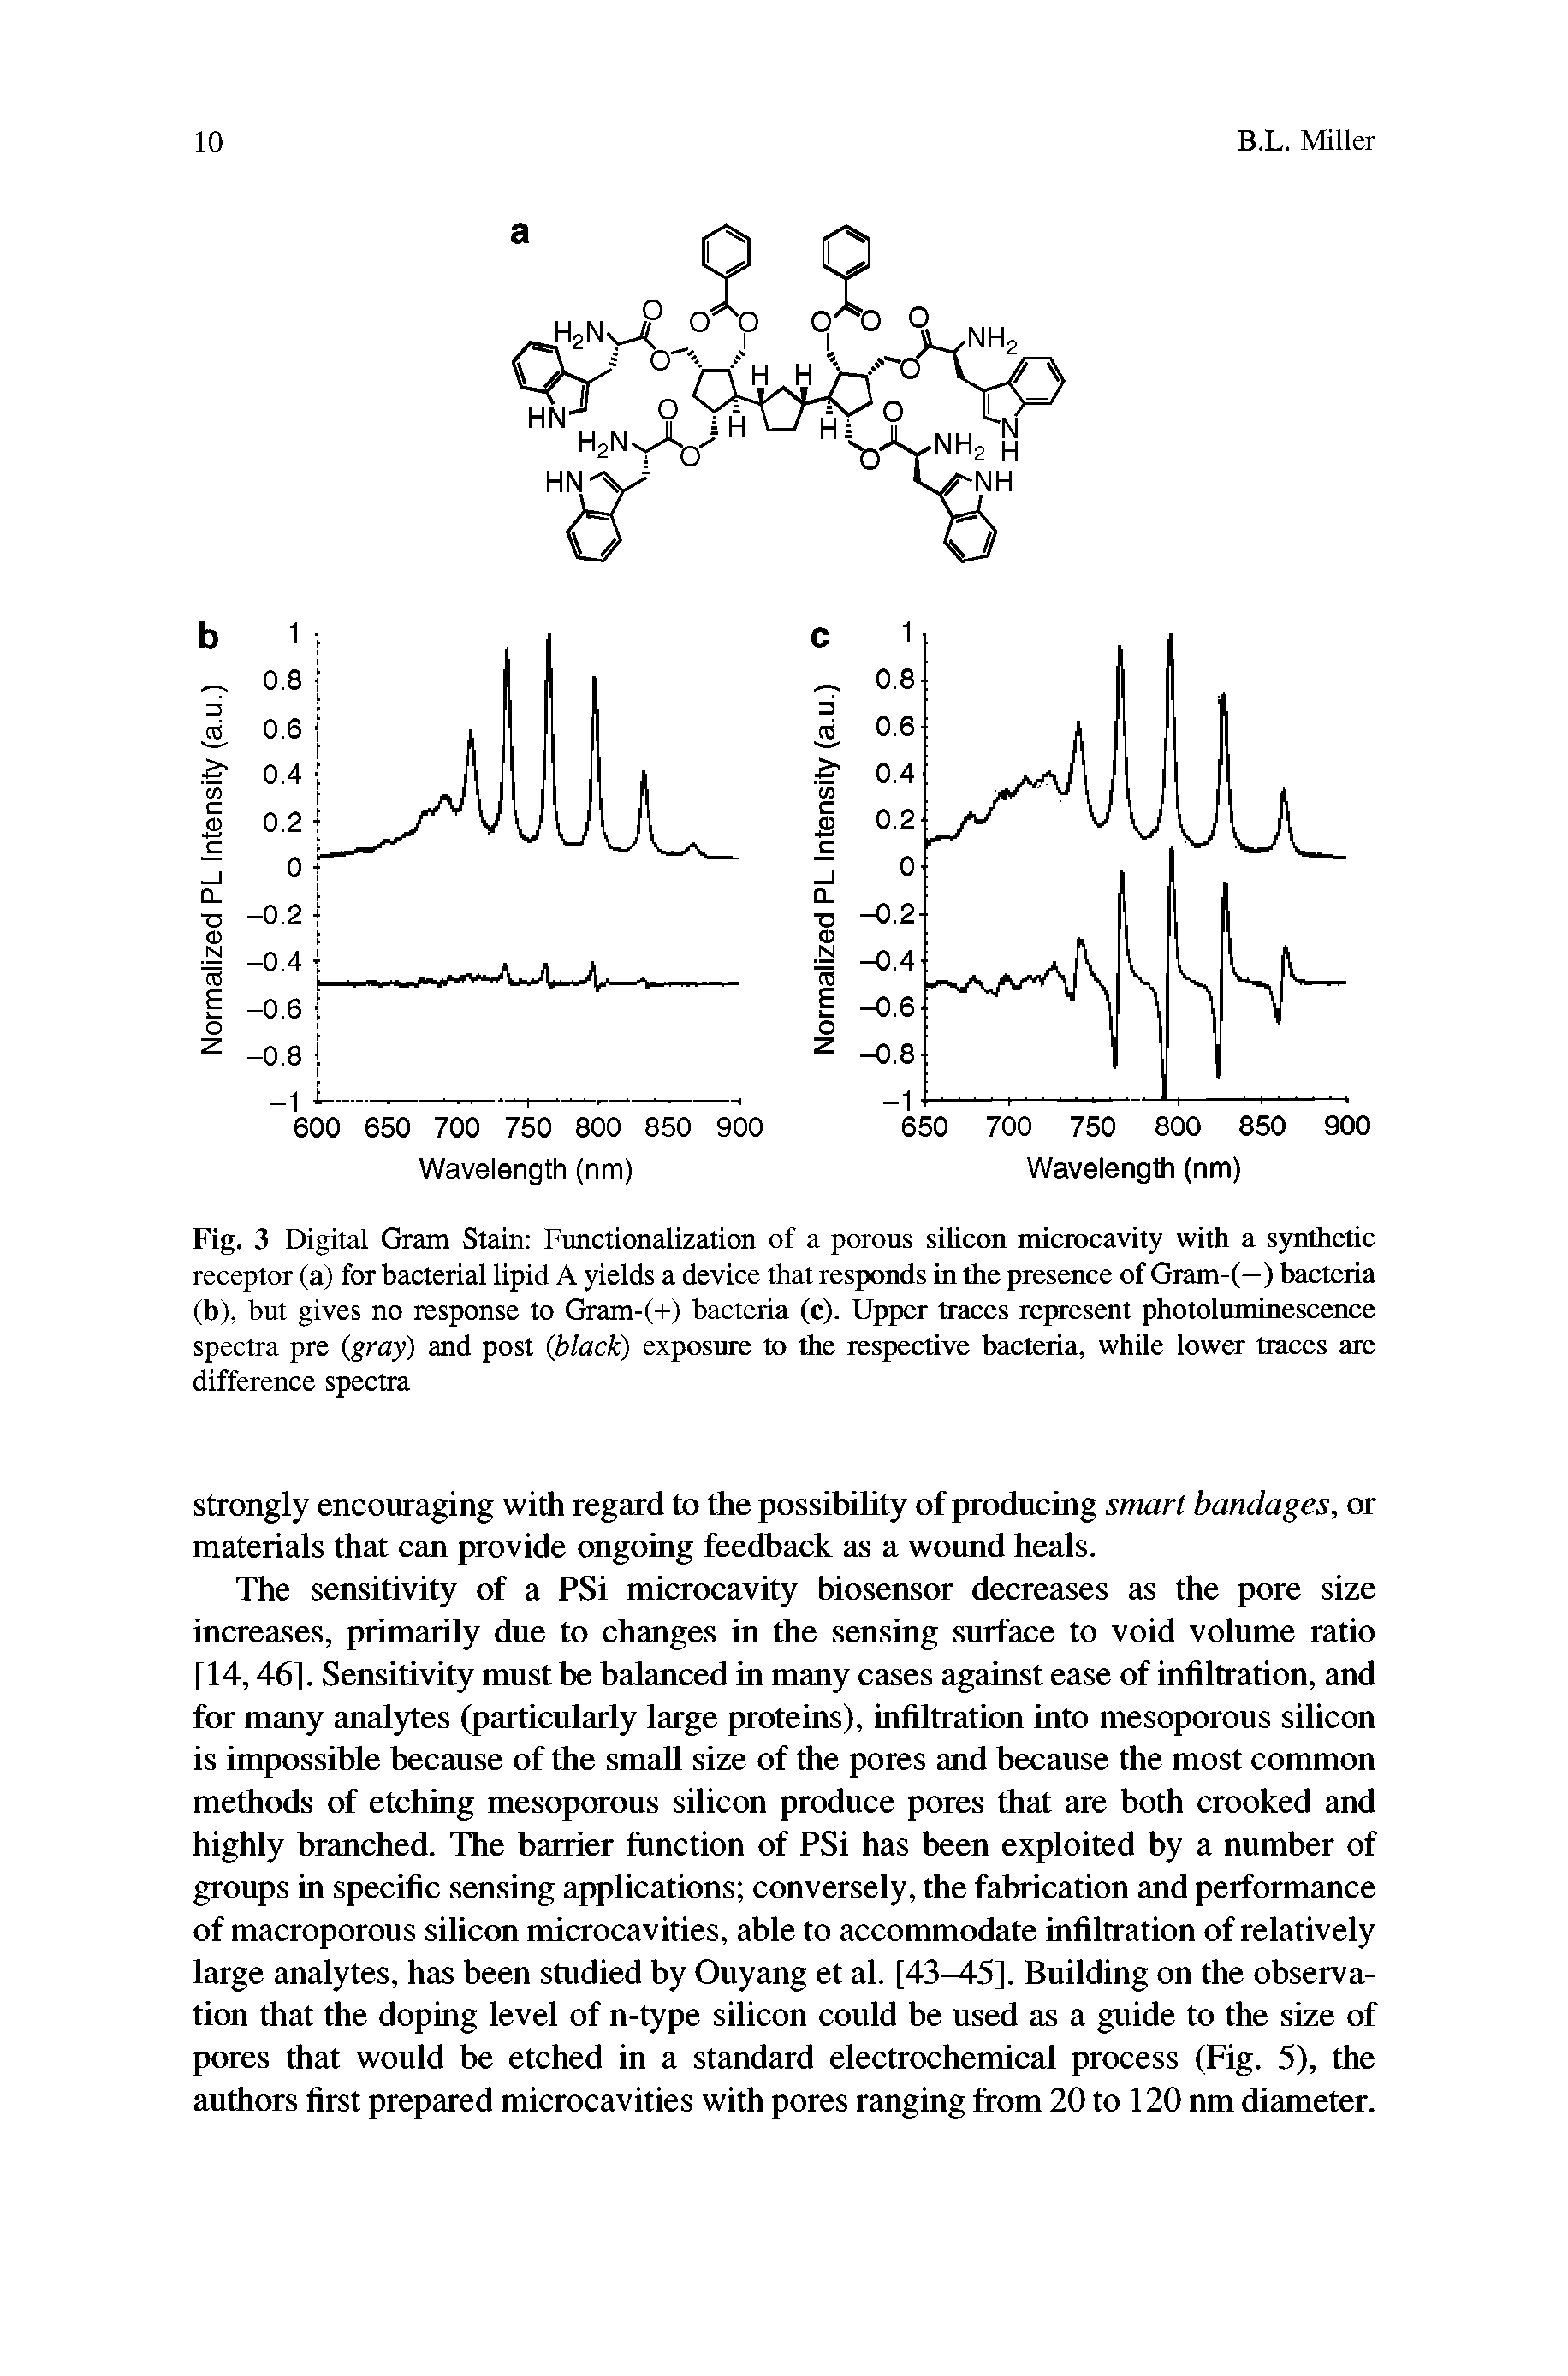 Fig. 3 Digital Gram Stain Functionalization of a porous silicon microcavity with a synthetic receptor (a) for bacterial lipid A yields a device that responds in the presence of Gram-(—) bacteria (b), but gives no response to Gram-(+) bacteria (c). Upper traces represent photoluminescence spectra pre (gray) and post (black) exposure to the respective bacteria, while lower traces are difference spectra...